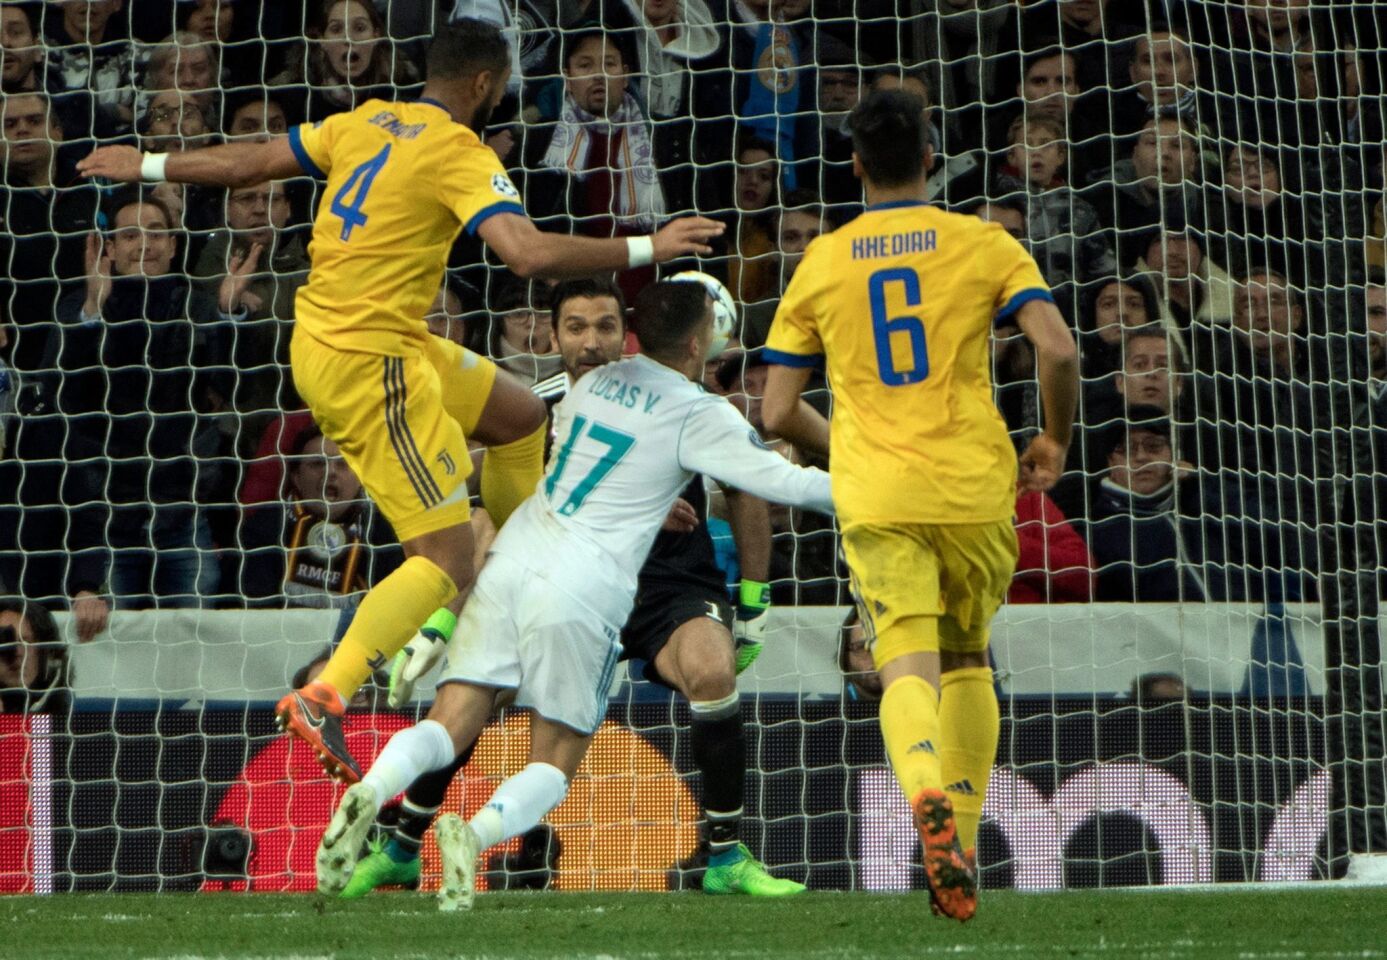 Real Madrid's Spanish midfielder Lucas Vazquez (2R) vies with Juventus' Italian defender Medhi Benatia (L) in front of Juventus' Italian goalkeeper Gianluigi Buffon during the UEFA Champions League quarter-final second leg football match between Real Madrid CF and Juventus FC at the Santiago Bernabeu stadium in Madrid on April 11, 2018. / AFP PHOTO / CURTO DE LA TORRECURTO DE LA TORRE/AFP/Getty Images ** OUTS - ELSENT, FPG, CM - OUTS * NM, PH, VA if sourced by CT, LA or MoD **